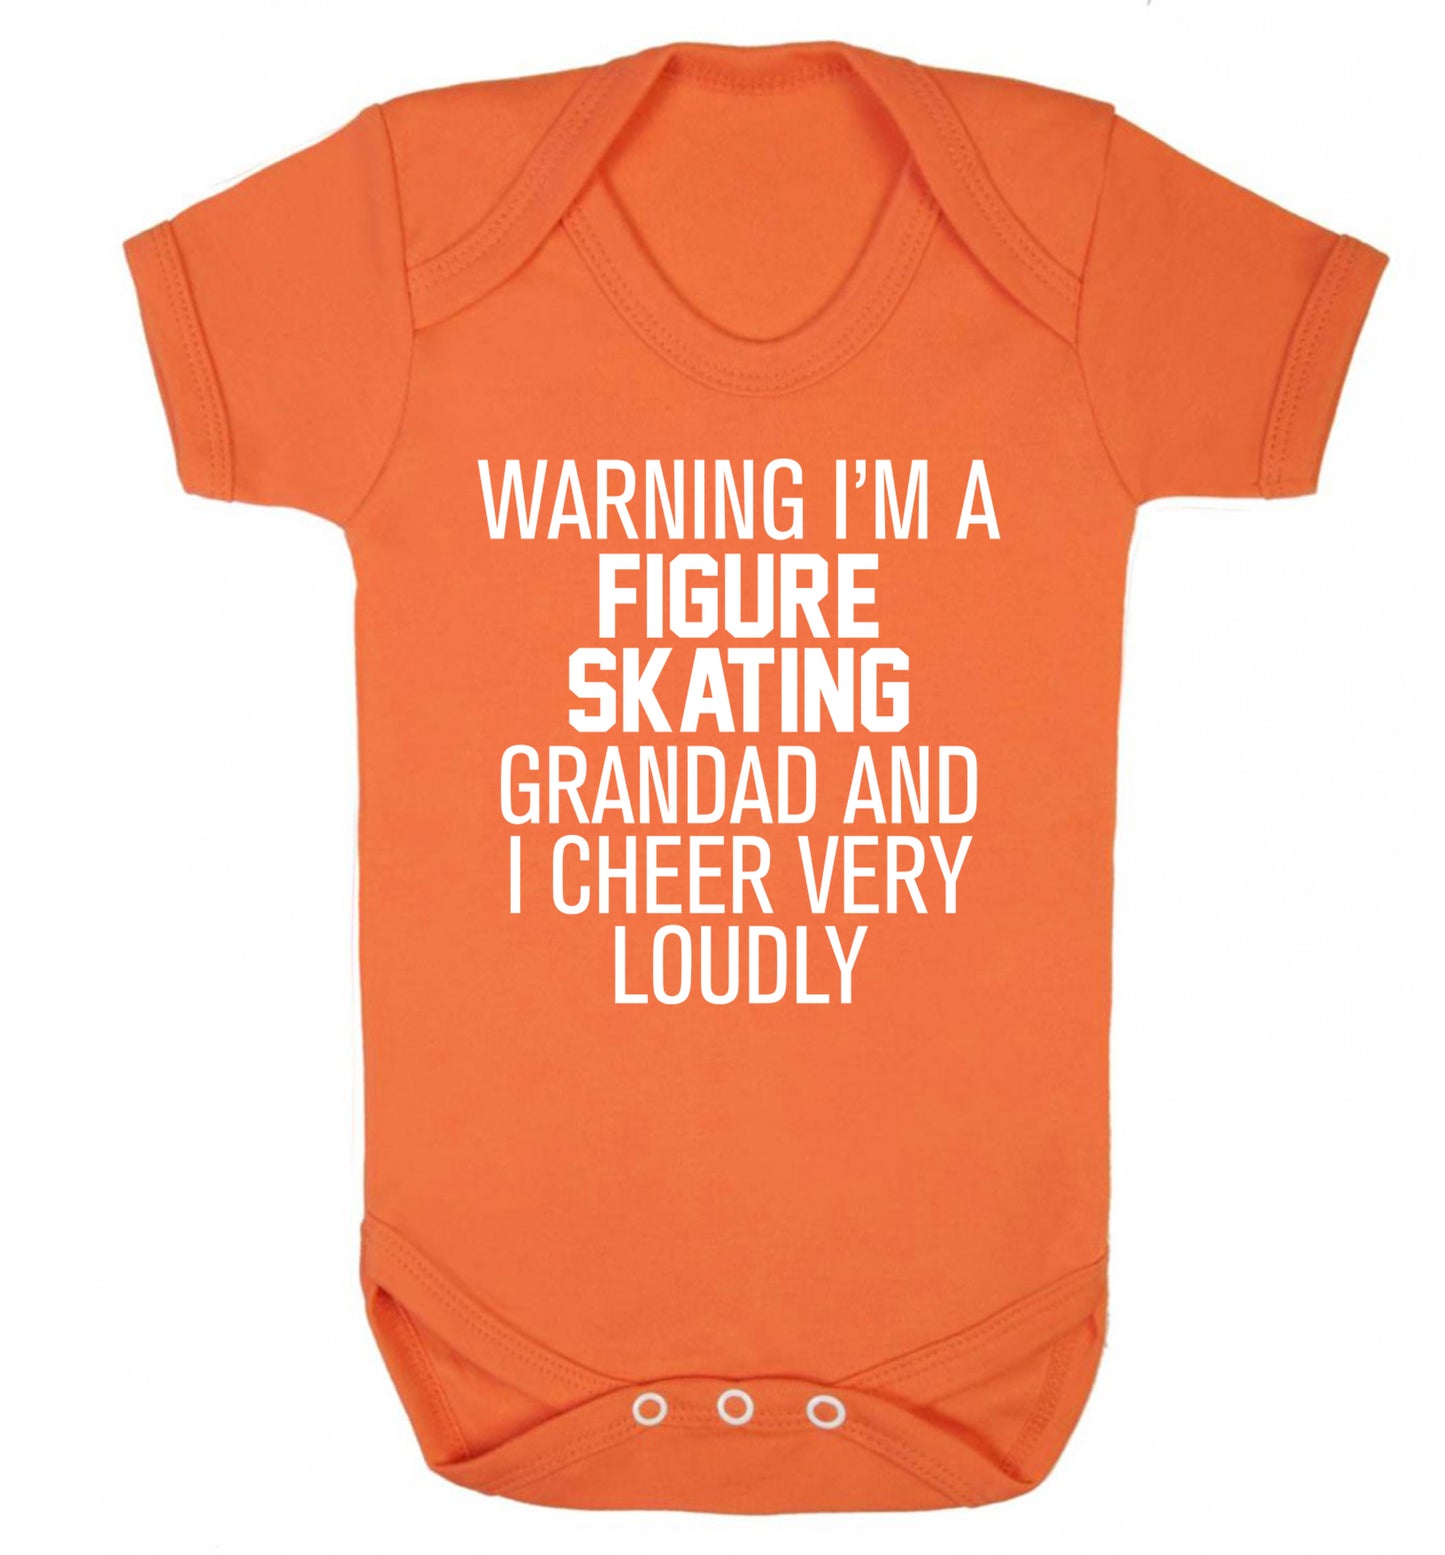 Warning I'm a figure skating grandad and I cheer very loudly Baby Vest orange 18-24 months